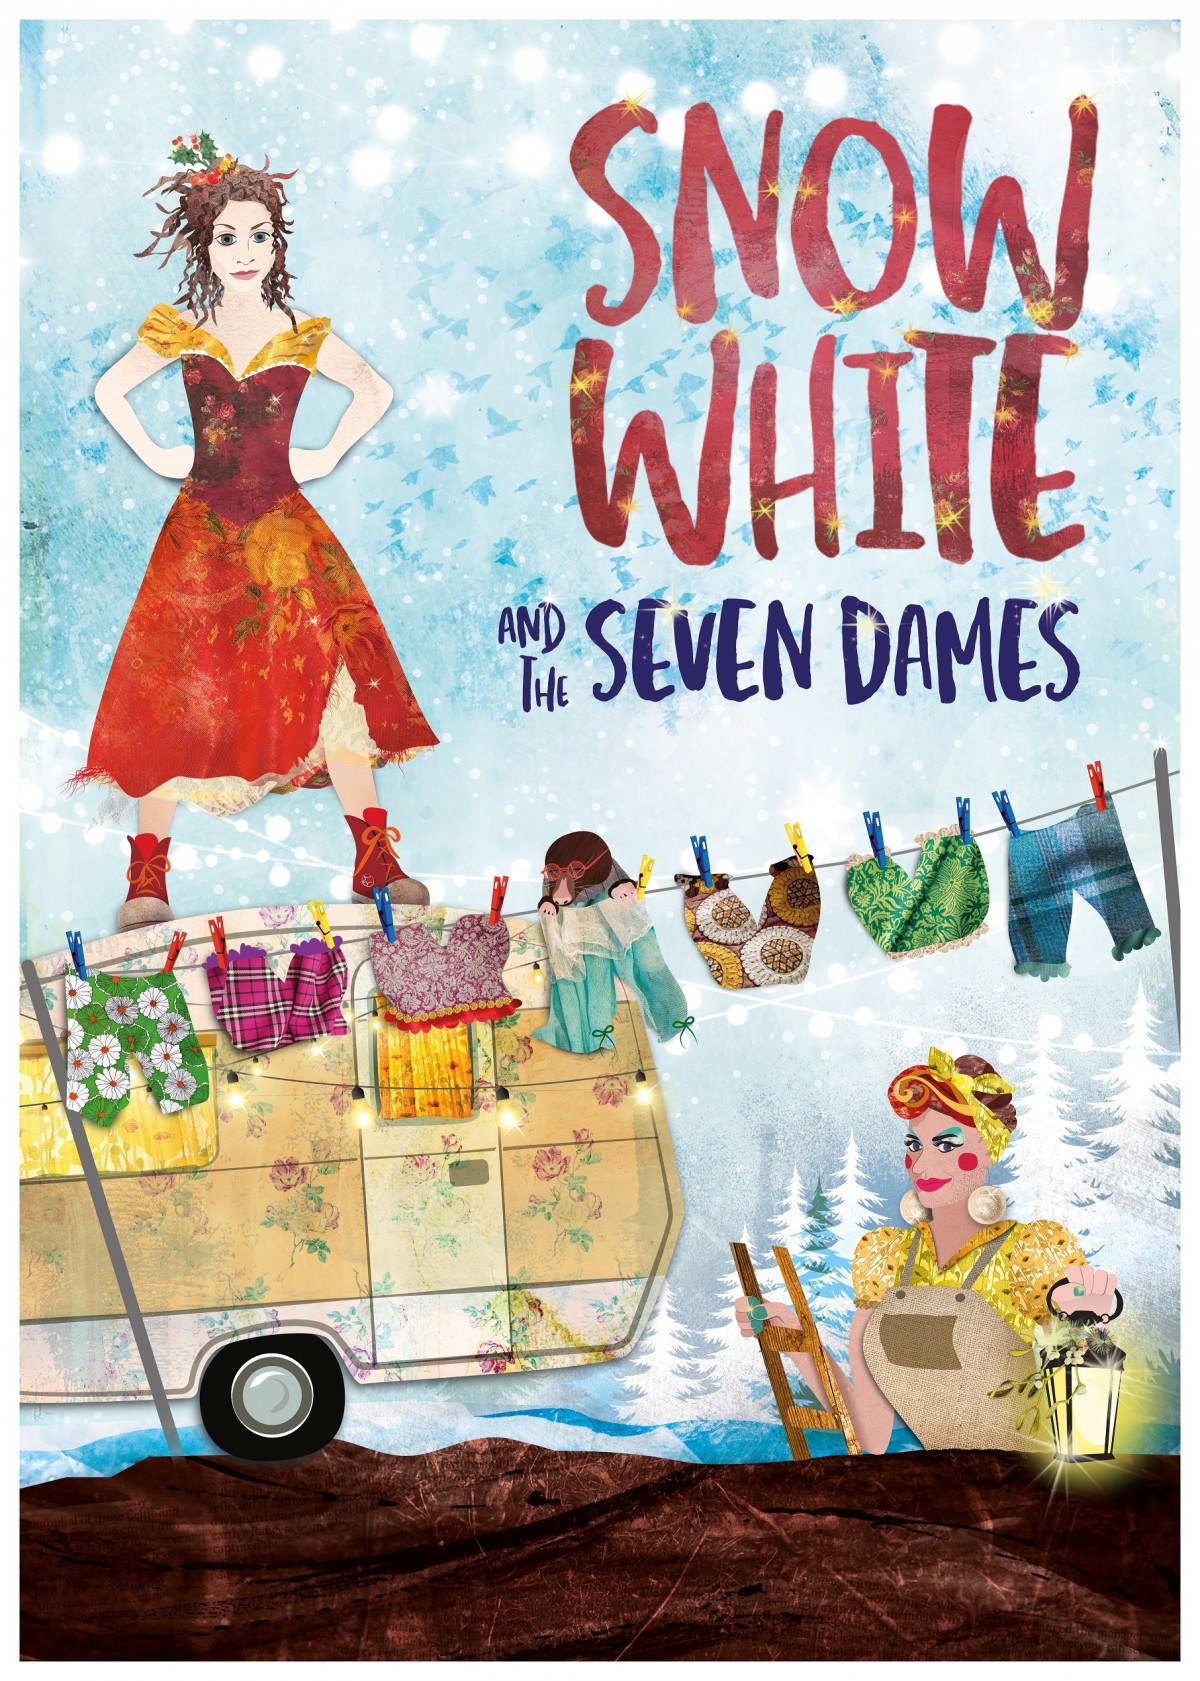 The perfect way to get in the Christmas spirit, Win 2 tickets to Perth Theatre's pantomime "Snow White and the Seven Dames". A fantastic family night out in the lead up to Christmas